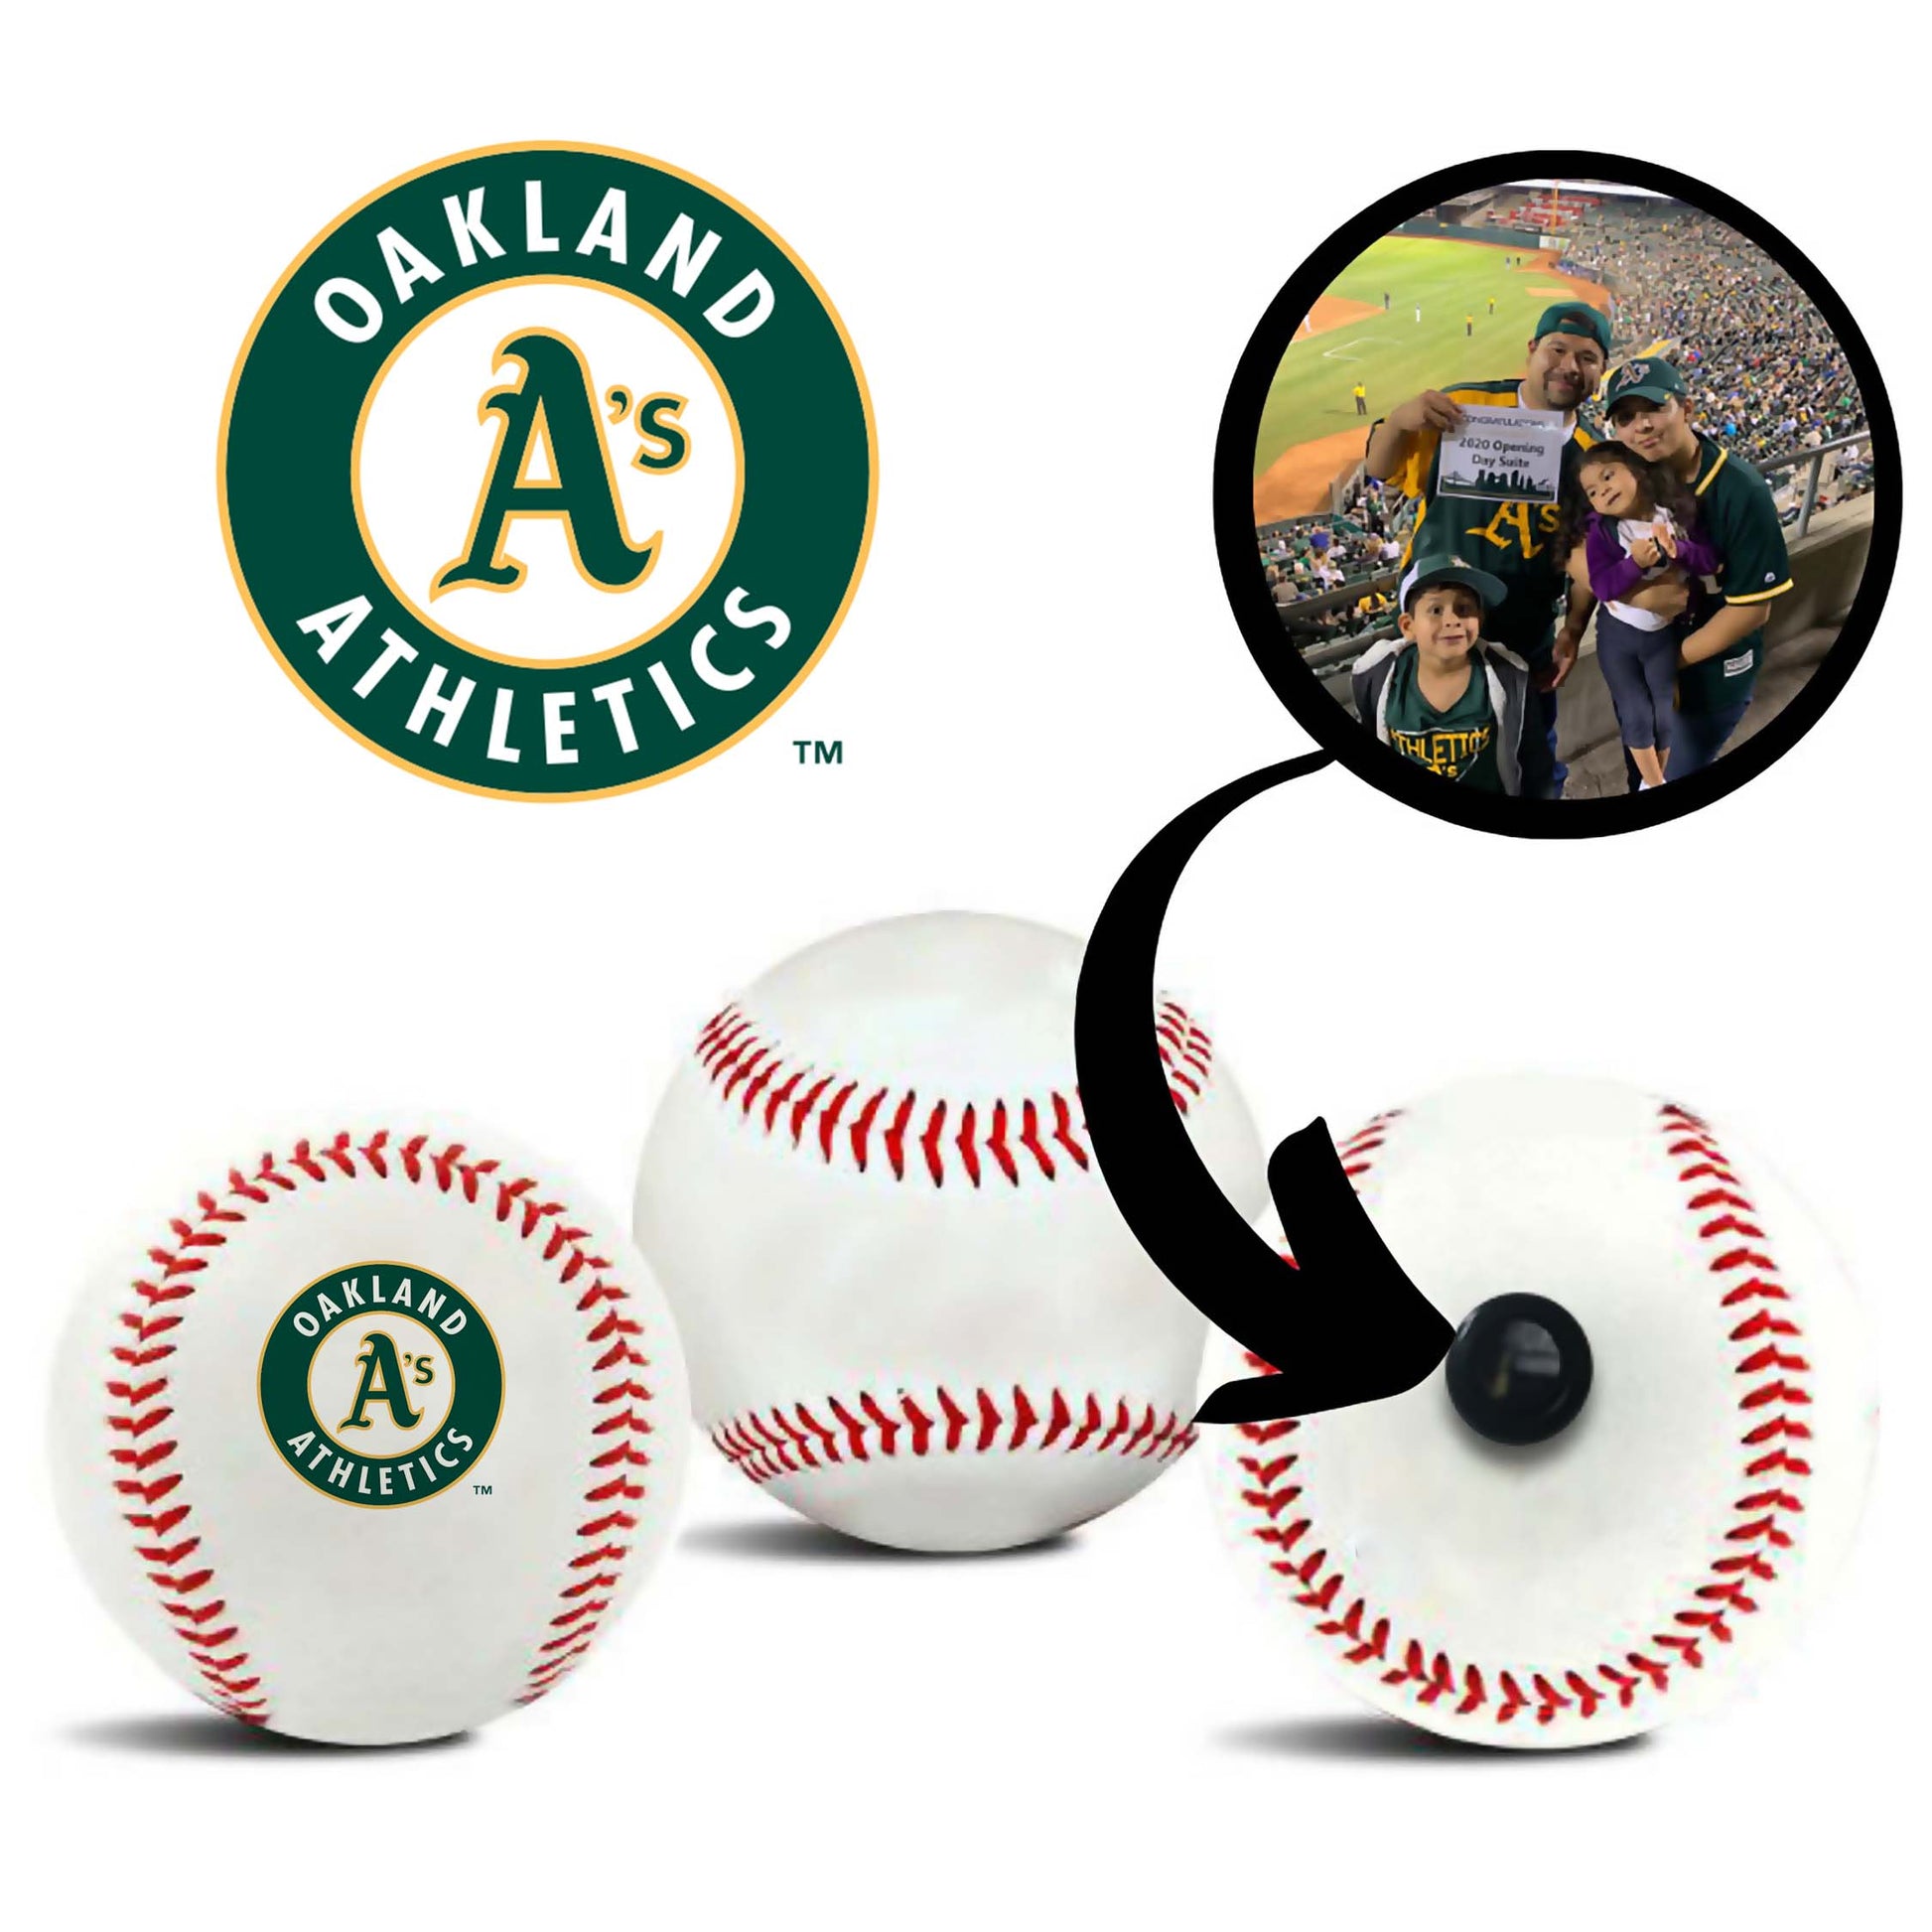 Oakland Athletics MLB Collectible Baseball, Picture Inside